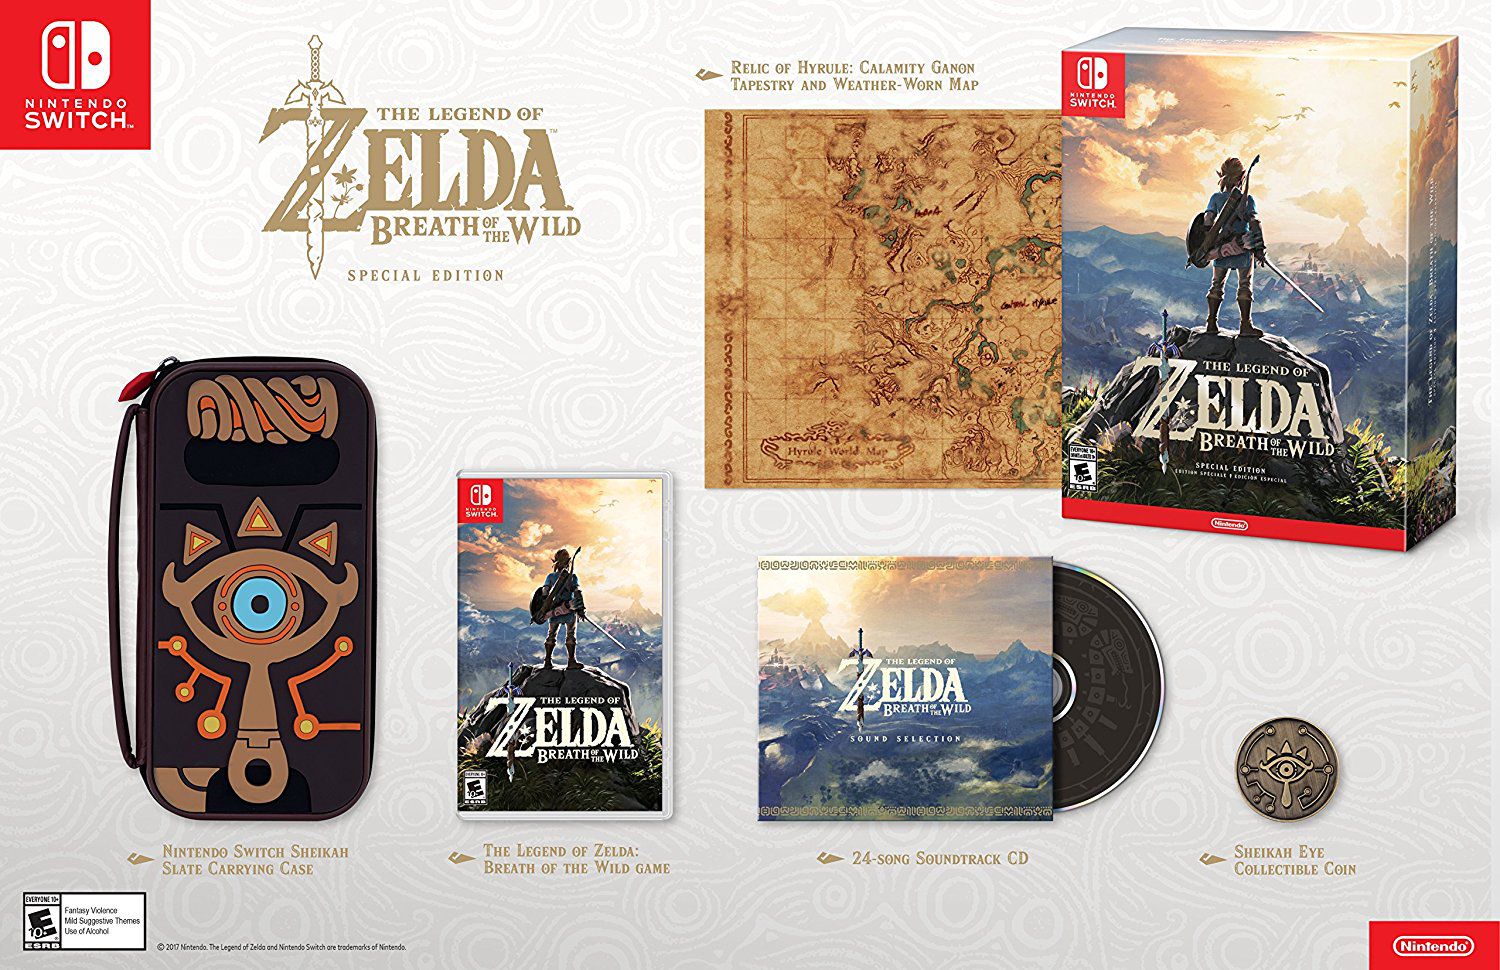 The Legend of Zelda: Breath of the Wild - World Edition for Wii U